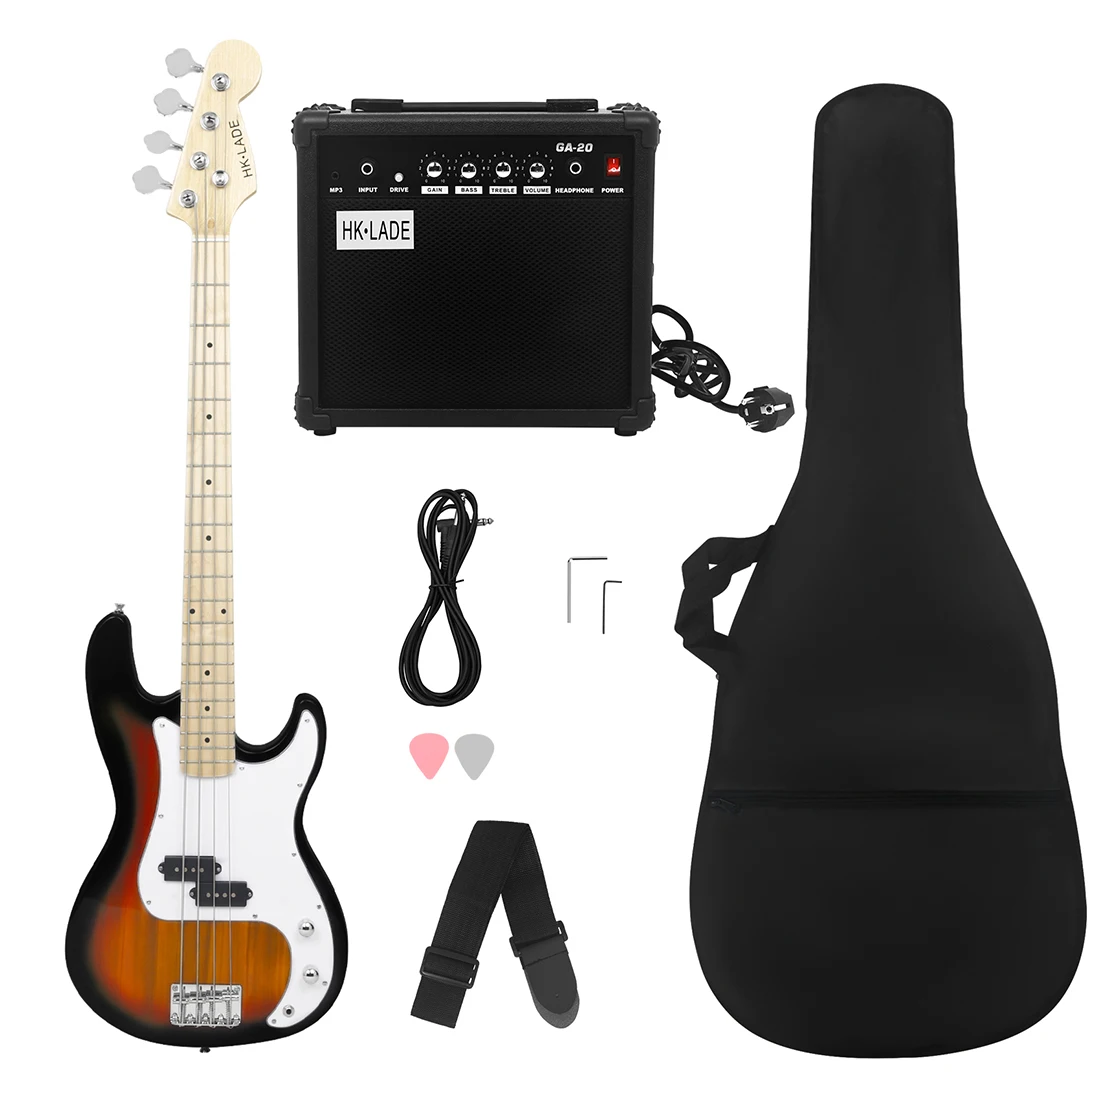 

HK·LADE 4 Strings Electric Bass Guitar 20 Frets Maple Body Neck Bass Guitarra With Case Amp Picks Guitar Parts & Accessories